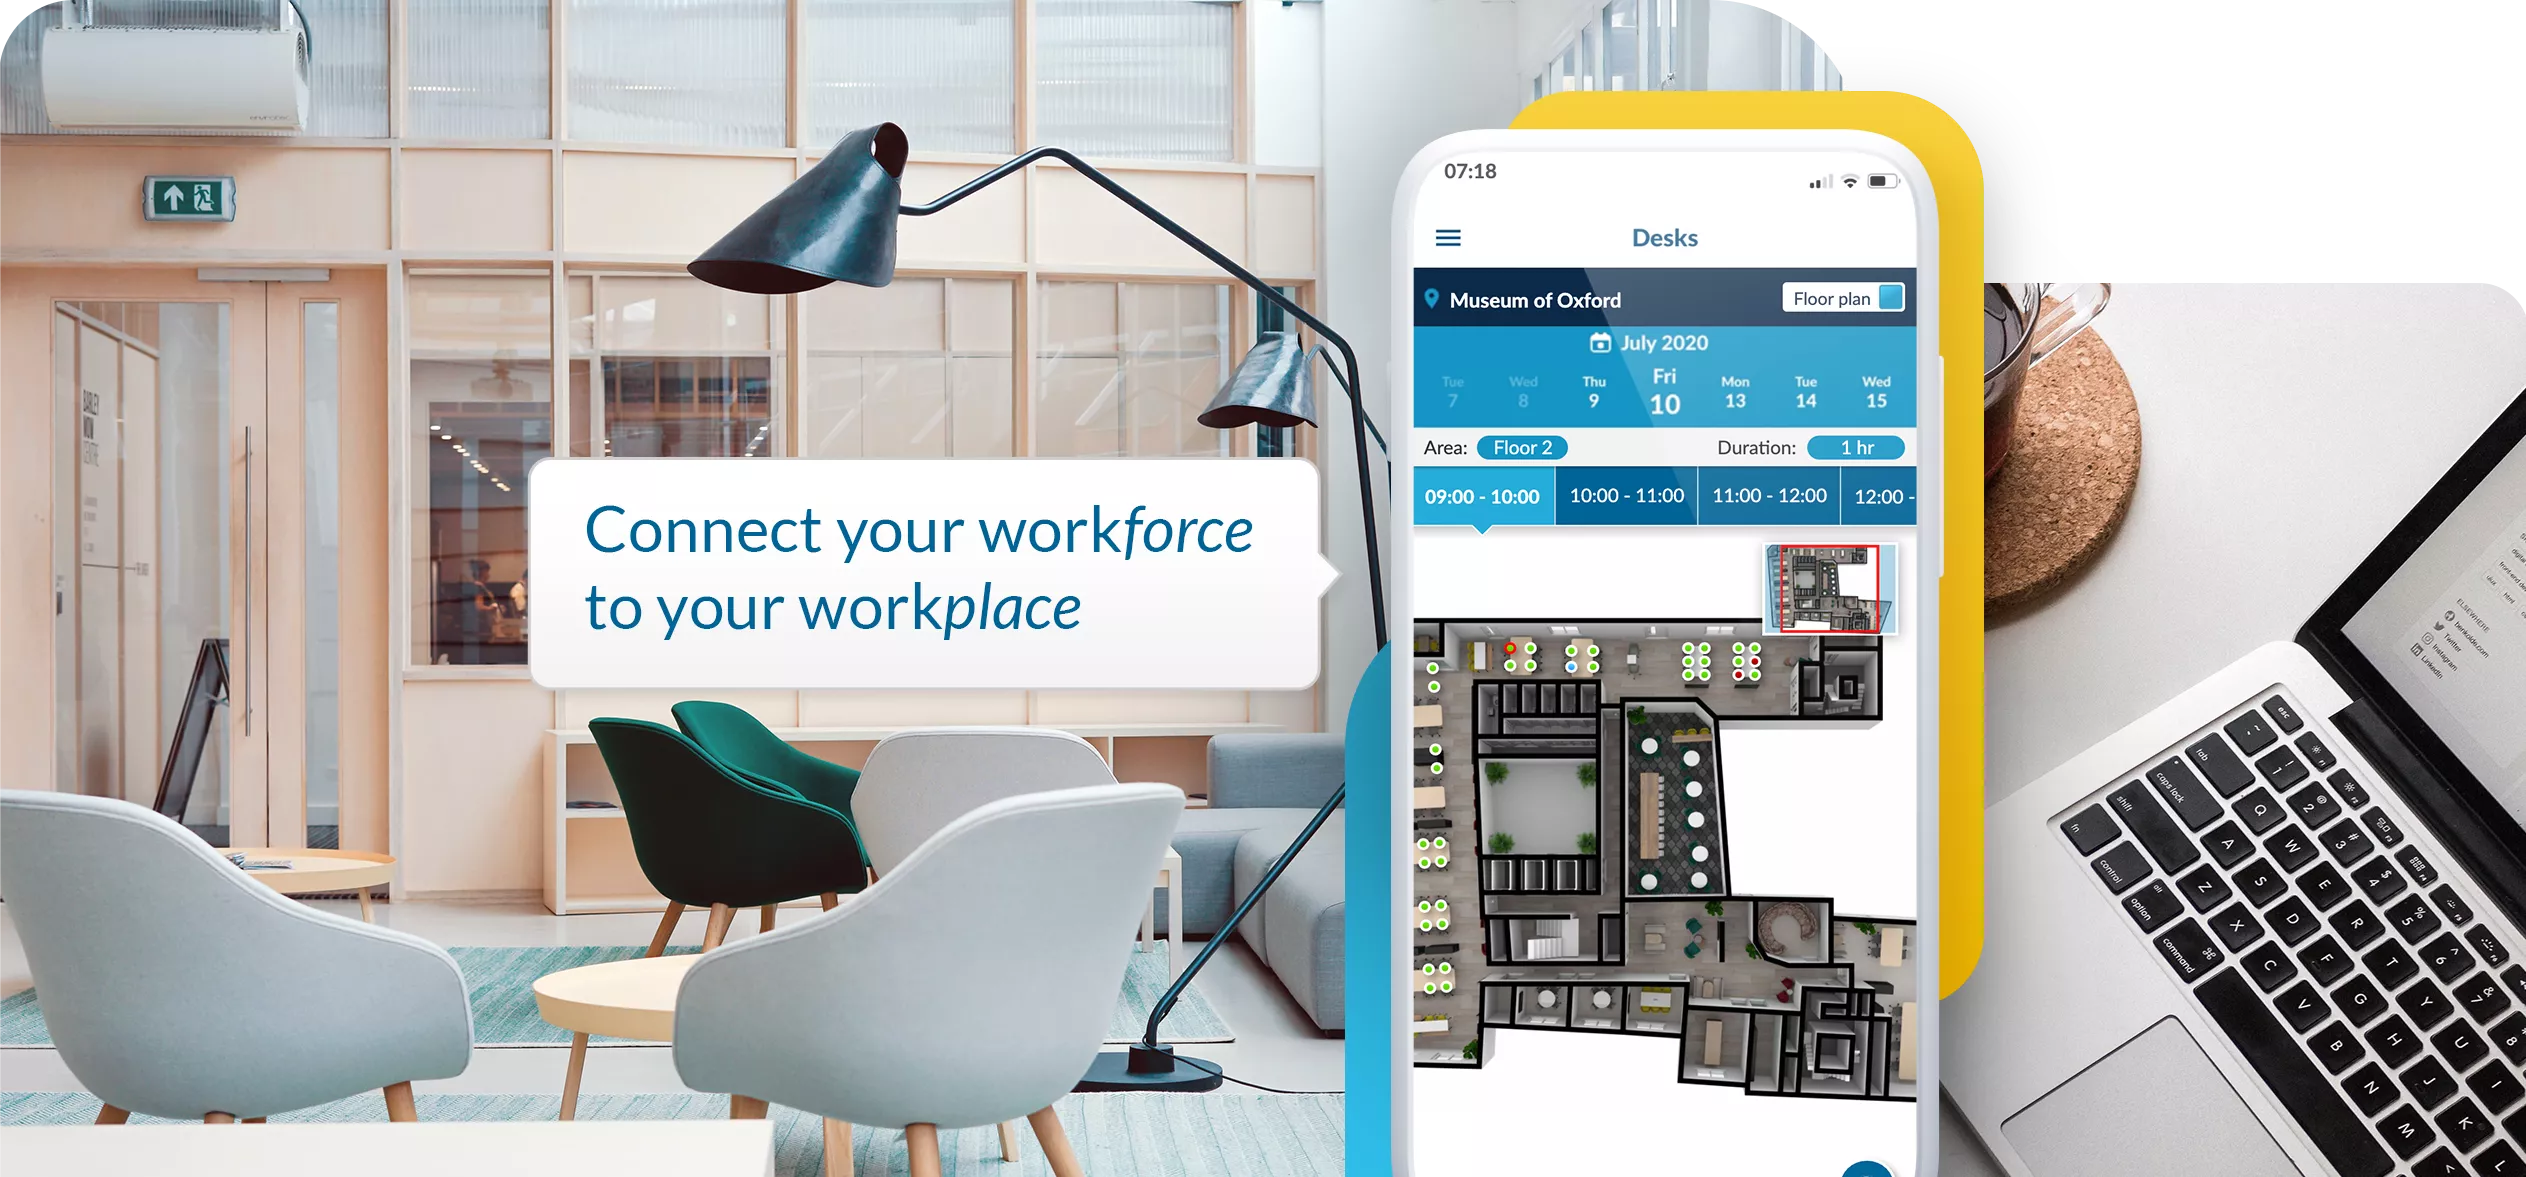 Connect your workforce with your workplace with Cloudbooking smart office solutions